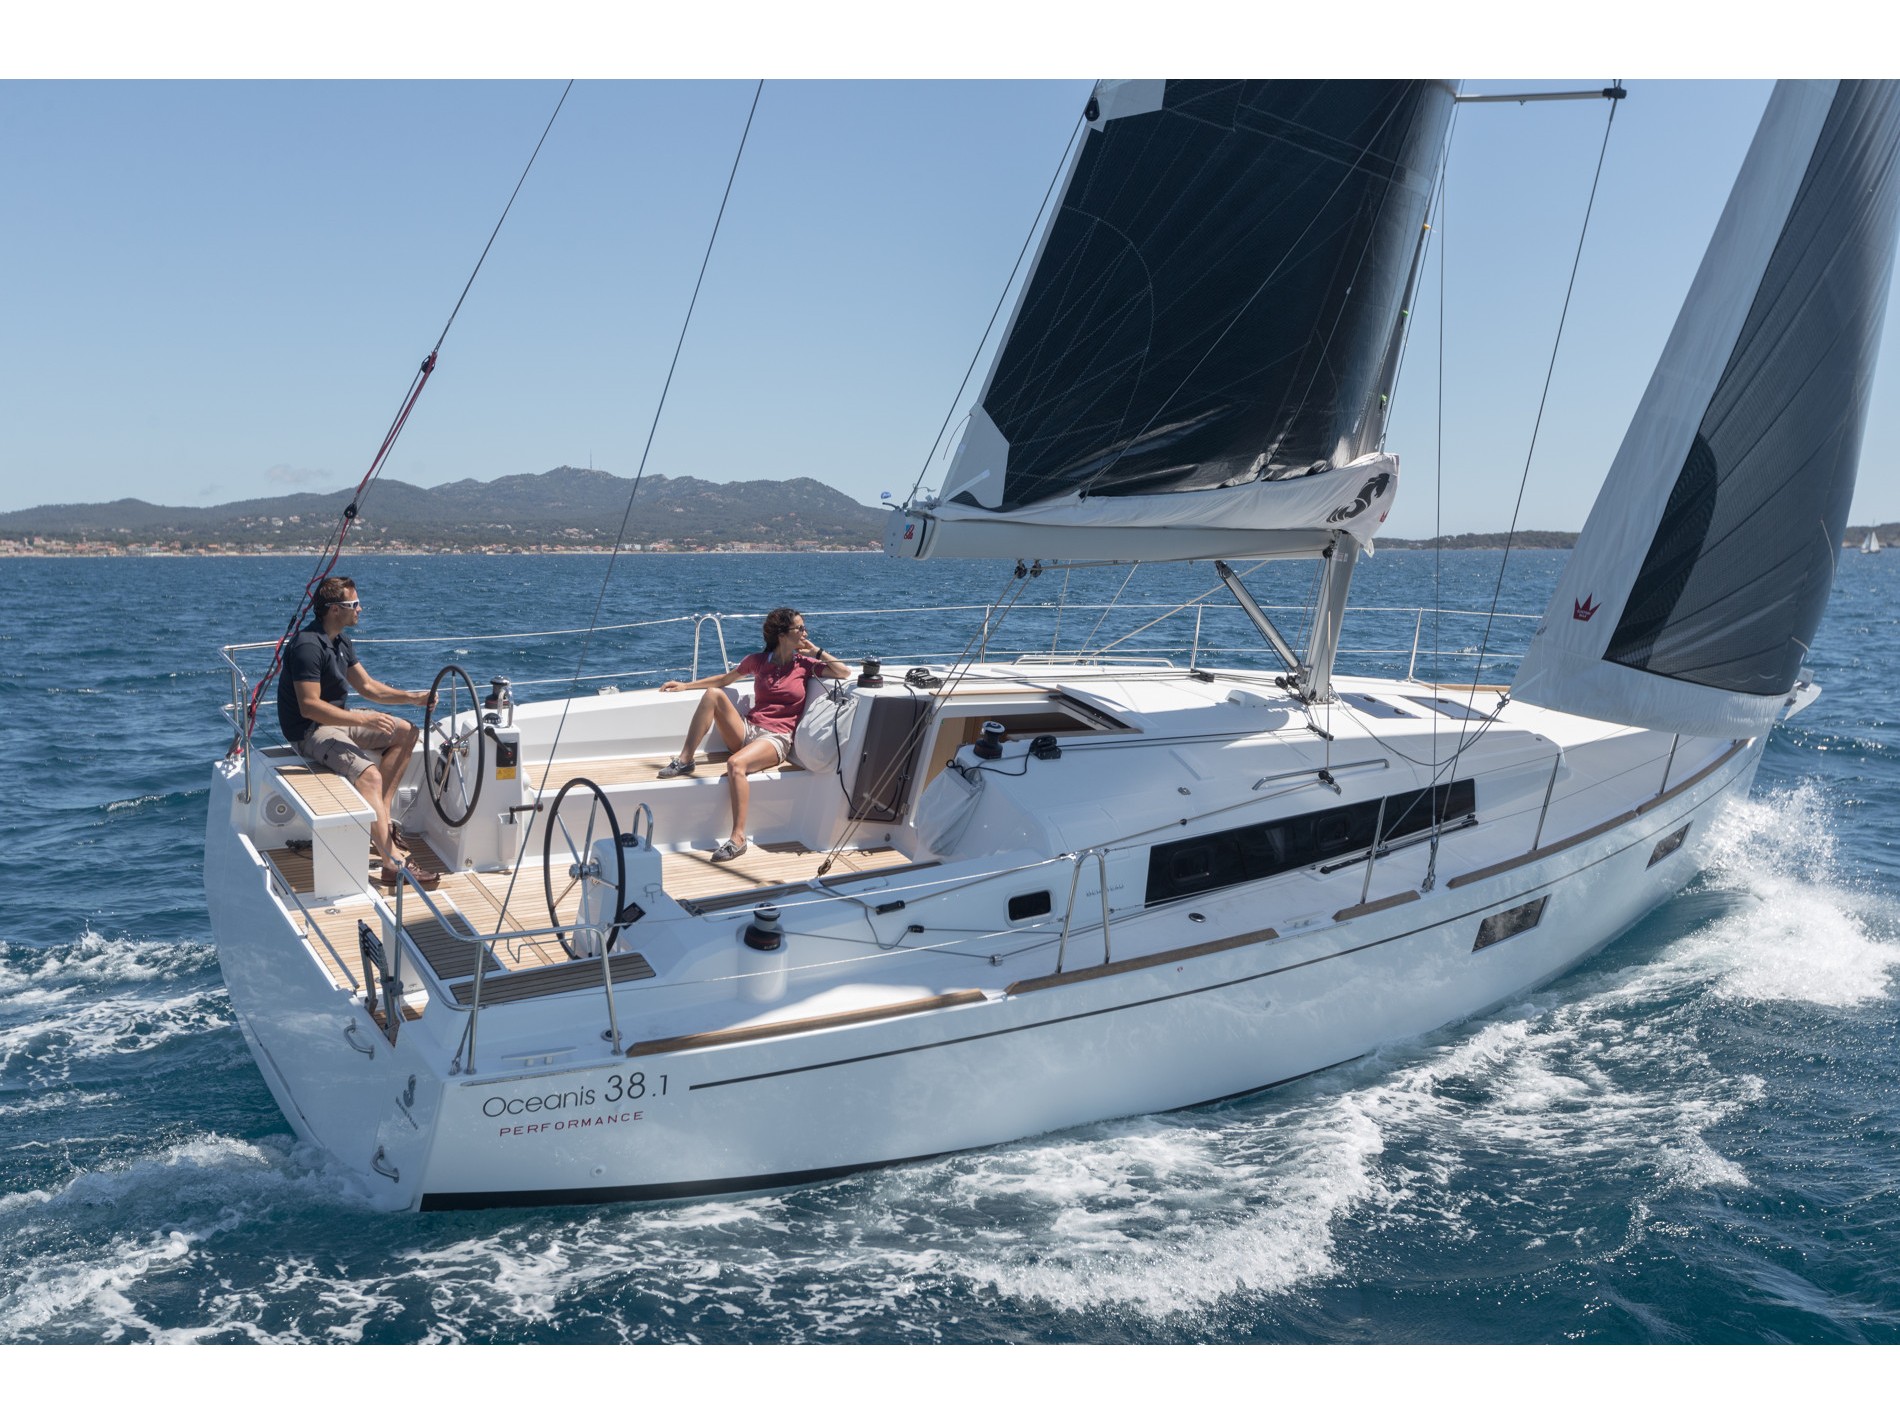 Oceanis 38.1 - Yacht Charter Cyprus & Boat hire in Cyprus Limassol Limassol Marina 5